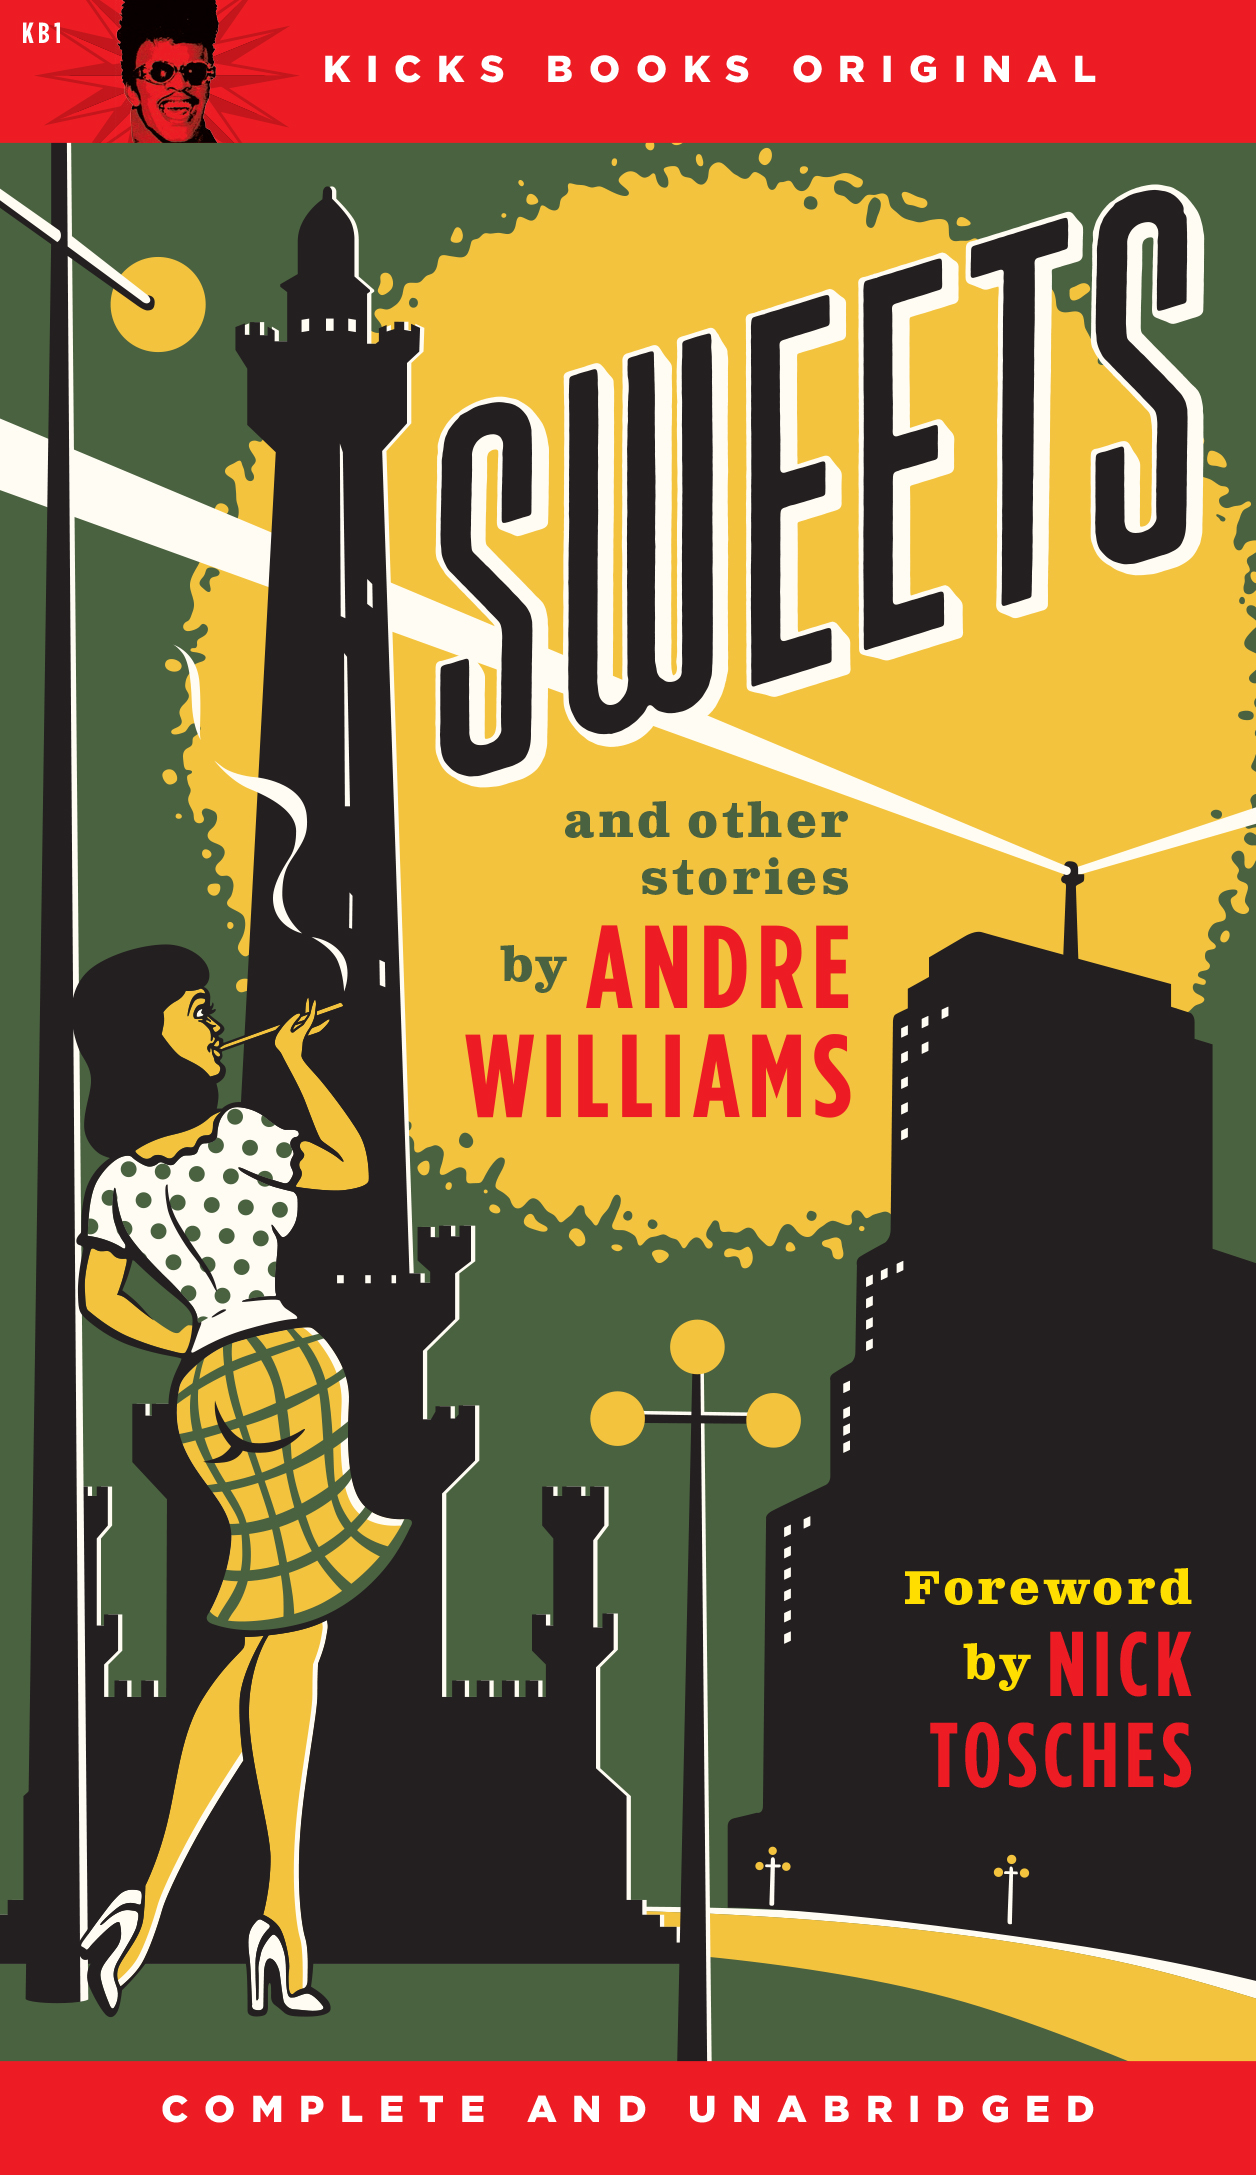 Andre Williams - Sweets cover